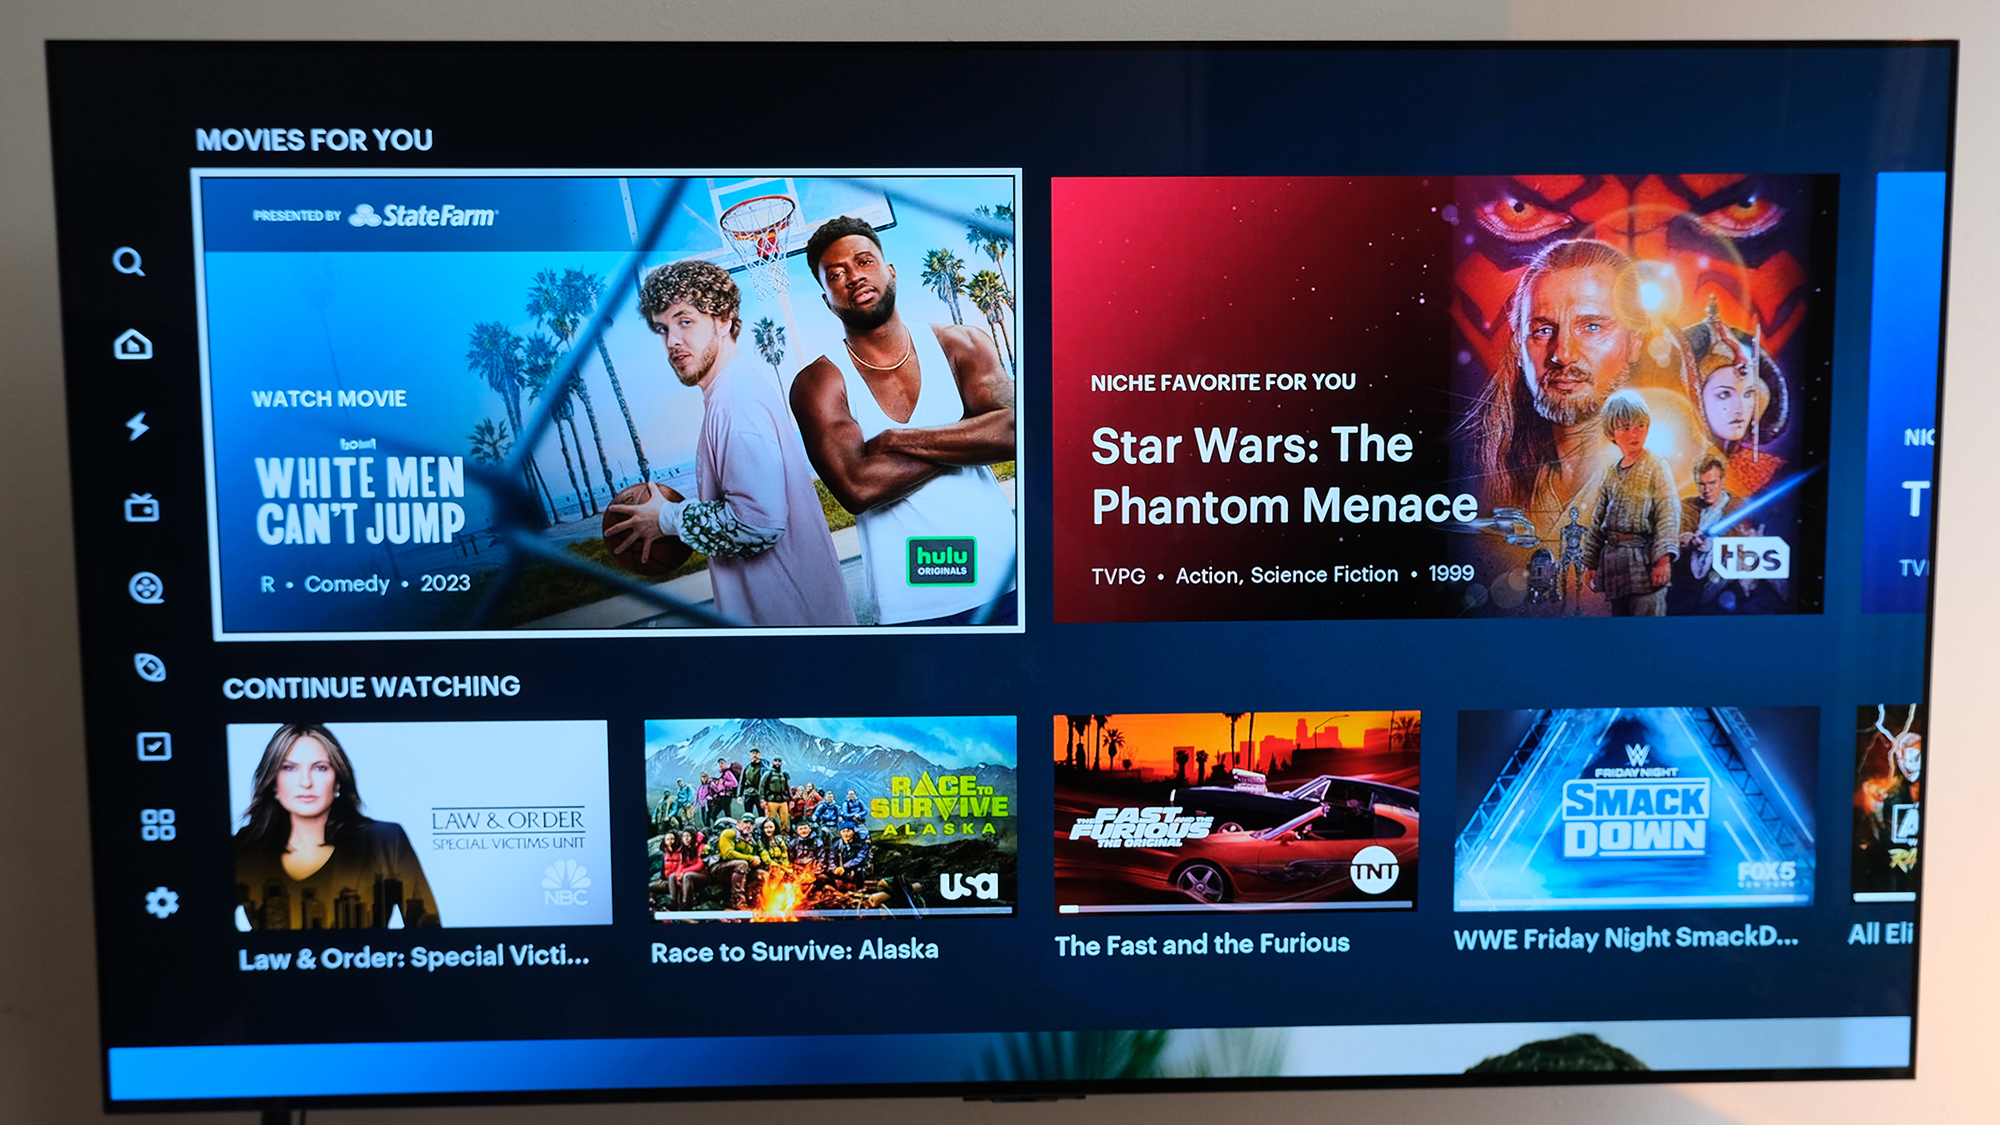 The Hulu homescreen scrolled down to the boxes for White Men Can't Jump (2023) and Star Wars: The Phantom Menace